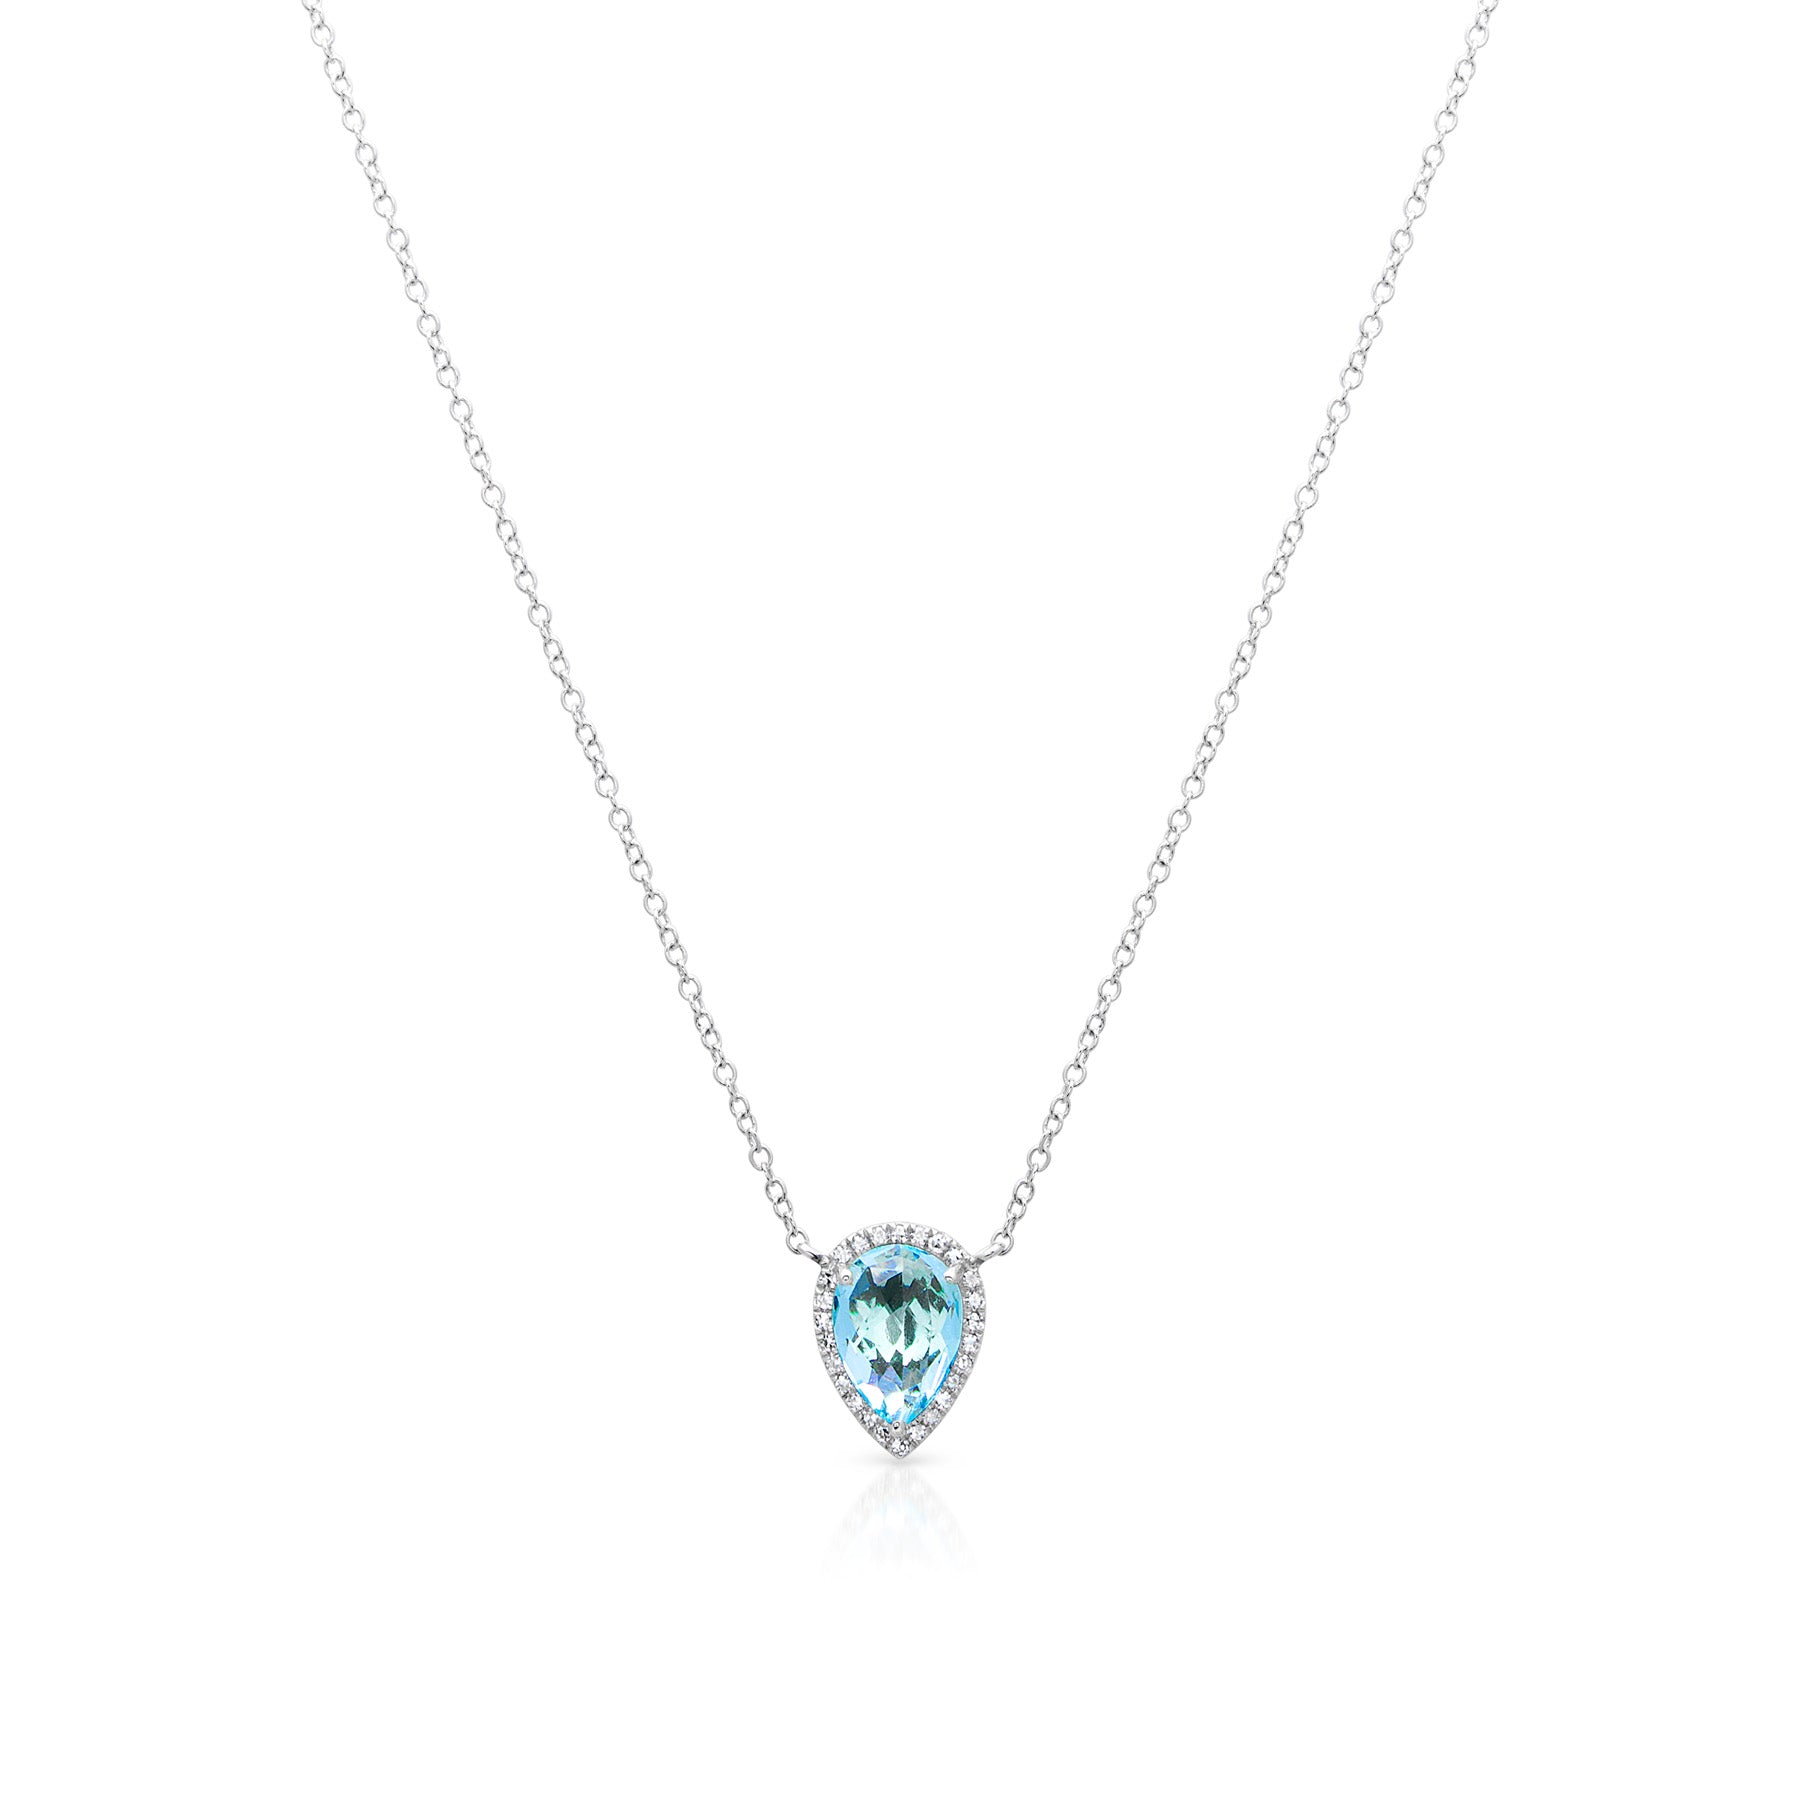 14KT White Gold Customize Your Own Sophie Necklace